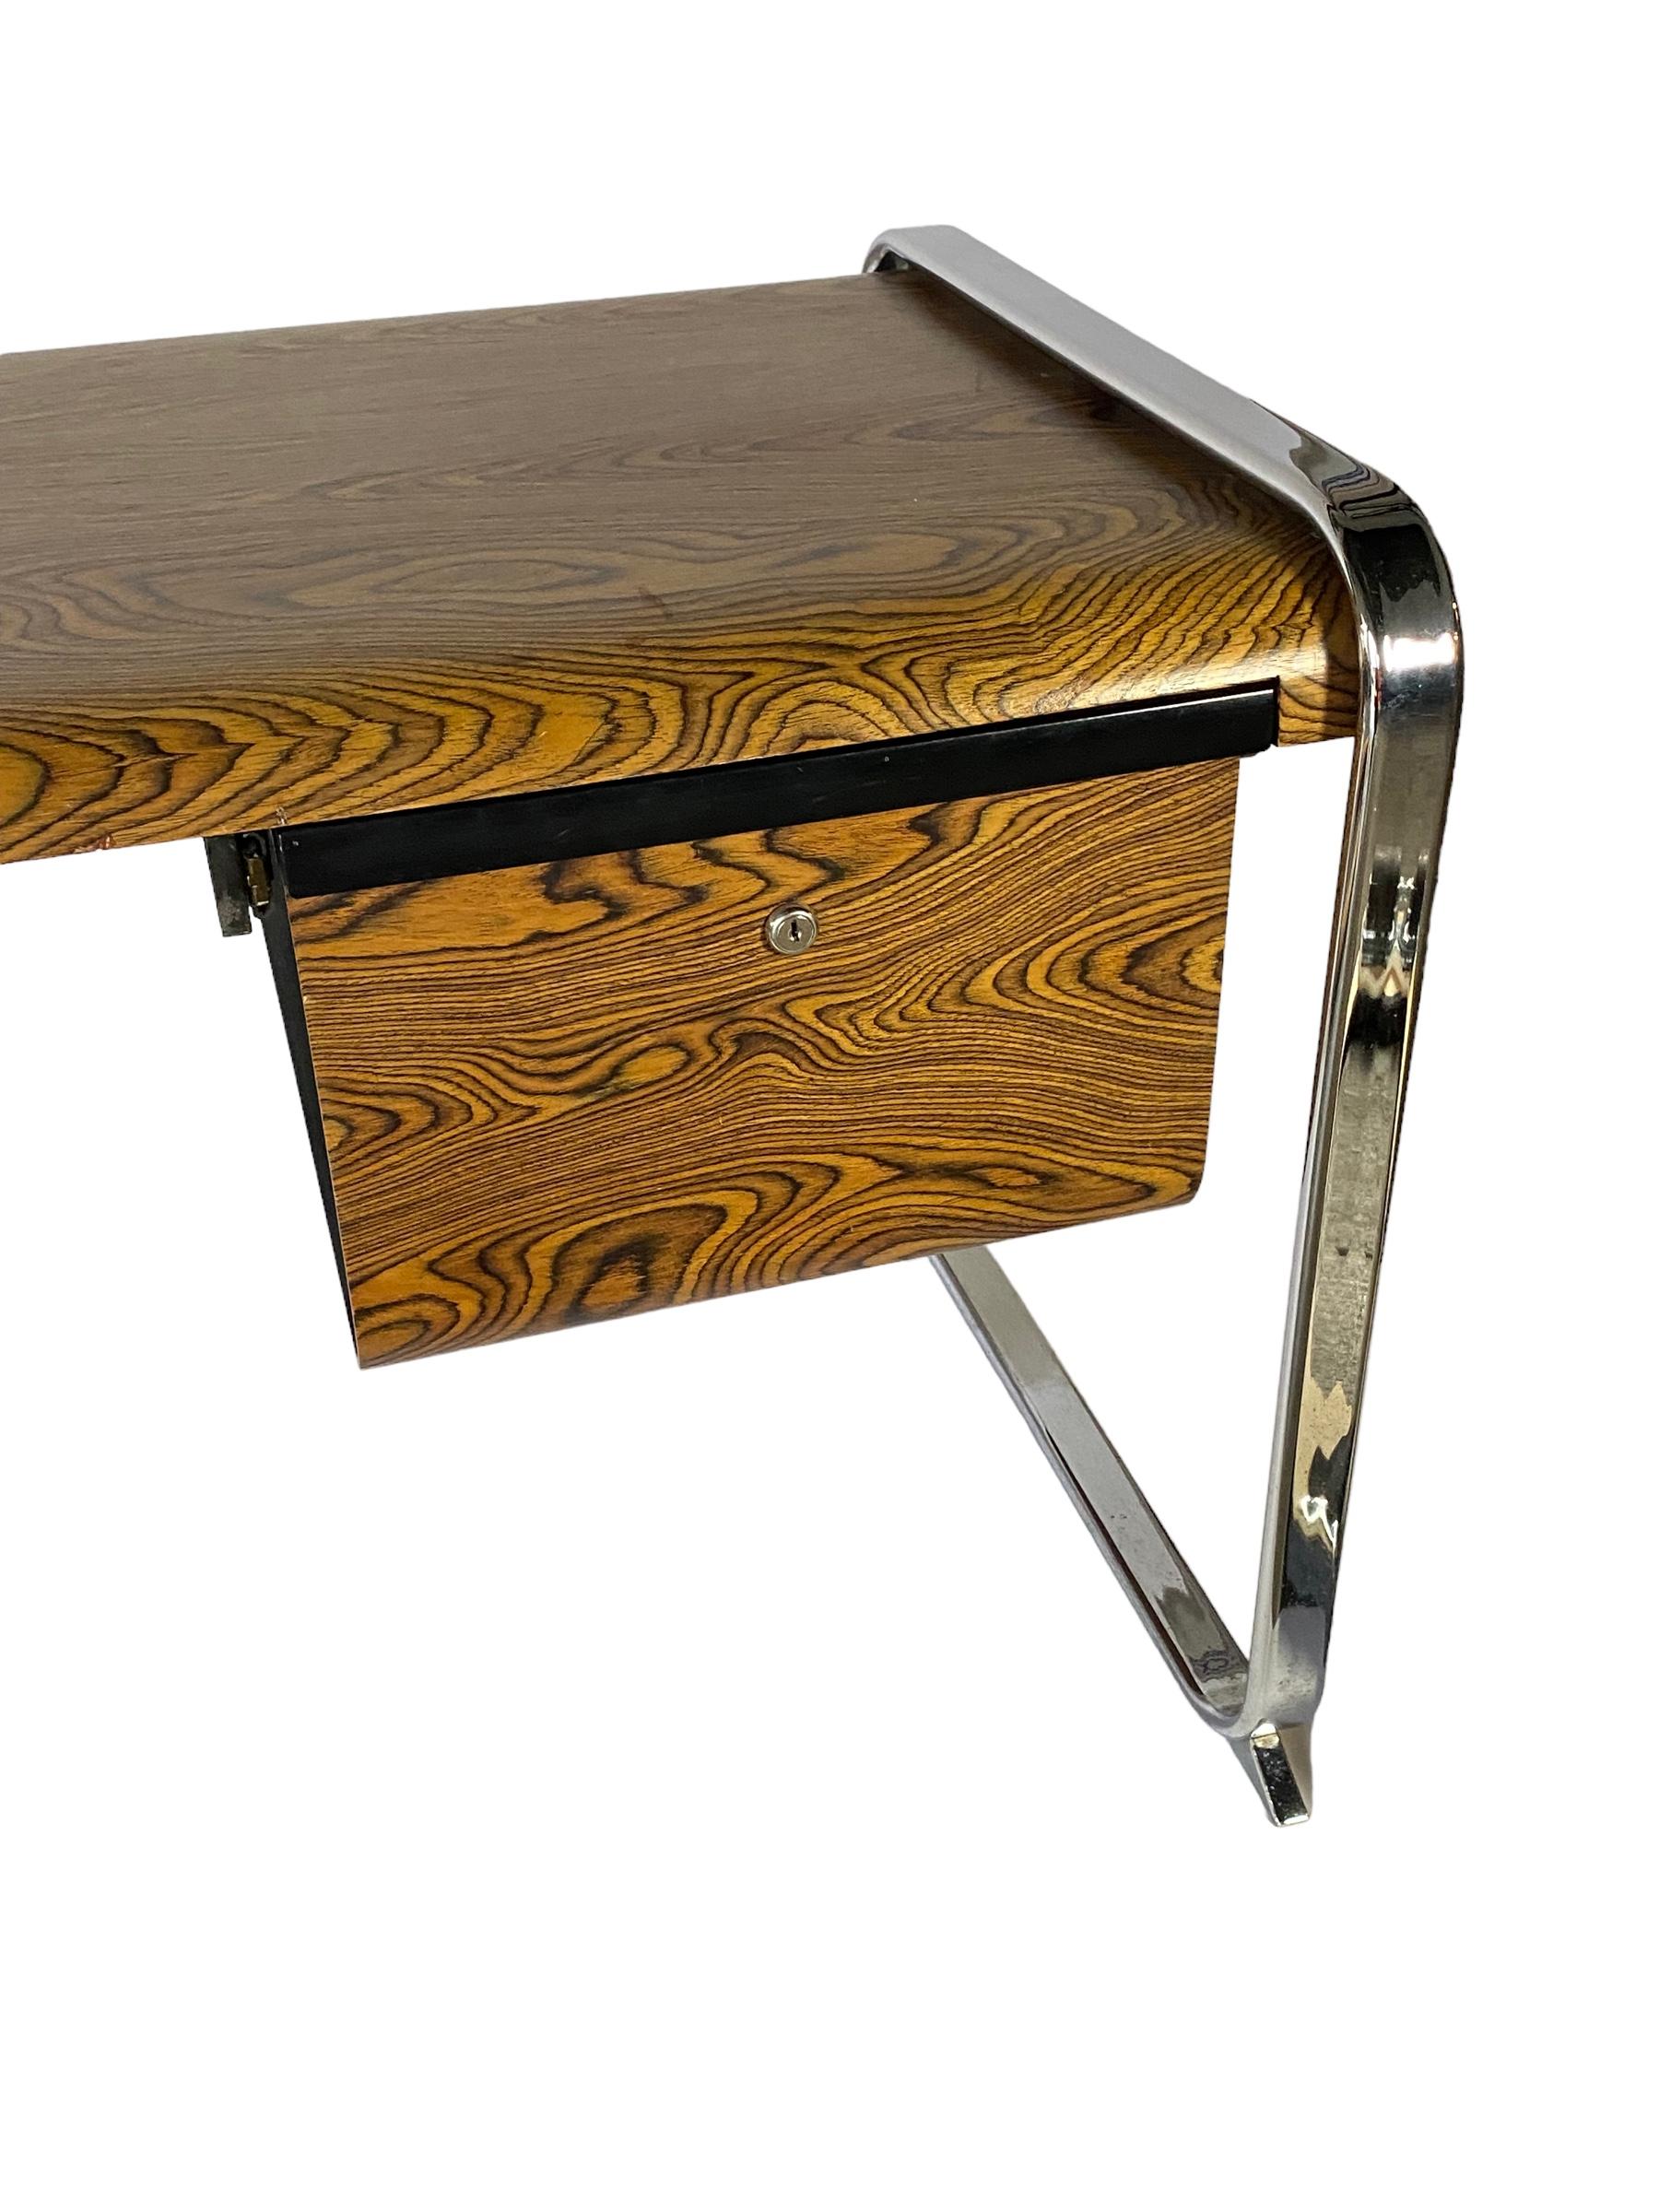 Beautiful iconic, Mid-Century Modern desk designed by Peter Protzman and manufactured by Herman Miller. This design was only produced for a handful of years and is definitely a difficult item to track down. Featuring molded Zebra wood, work